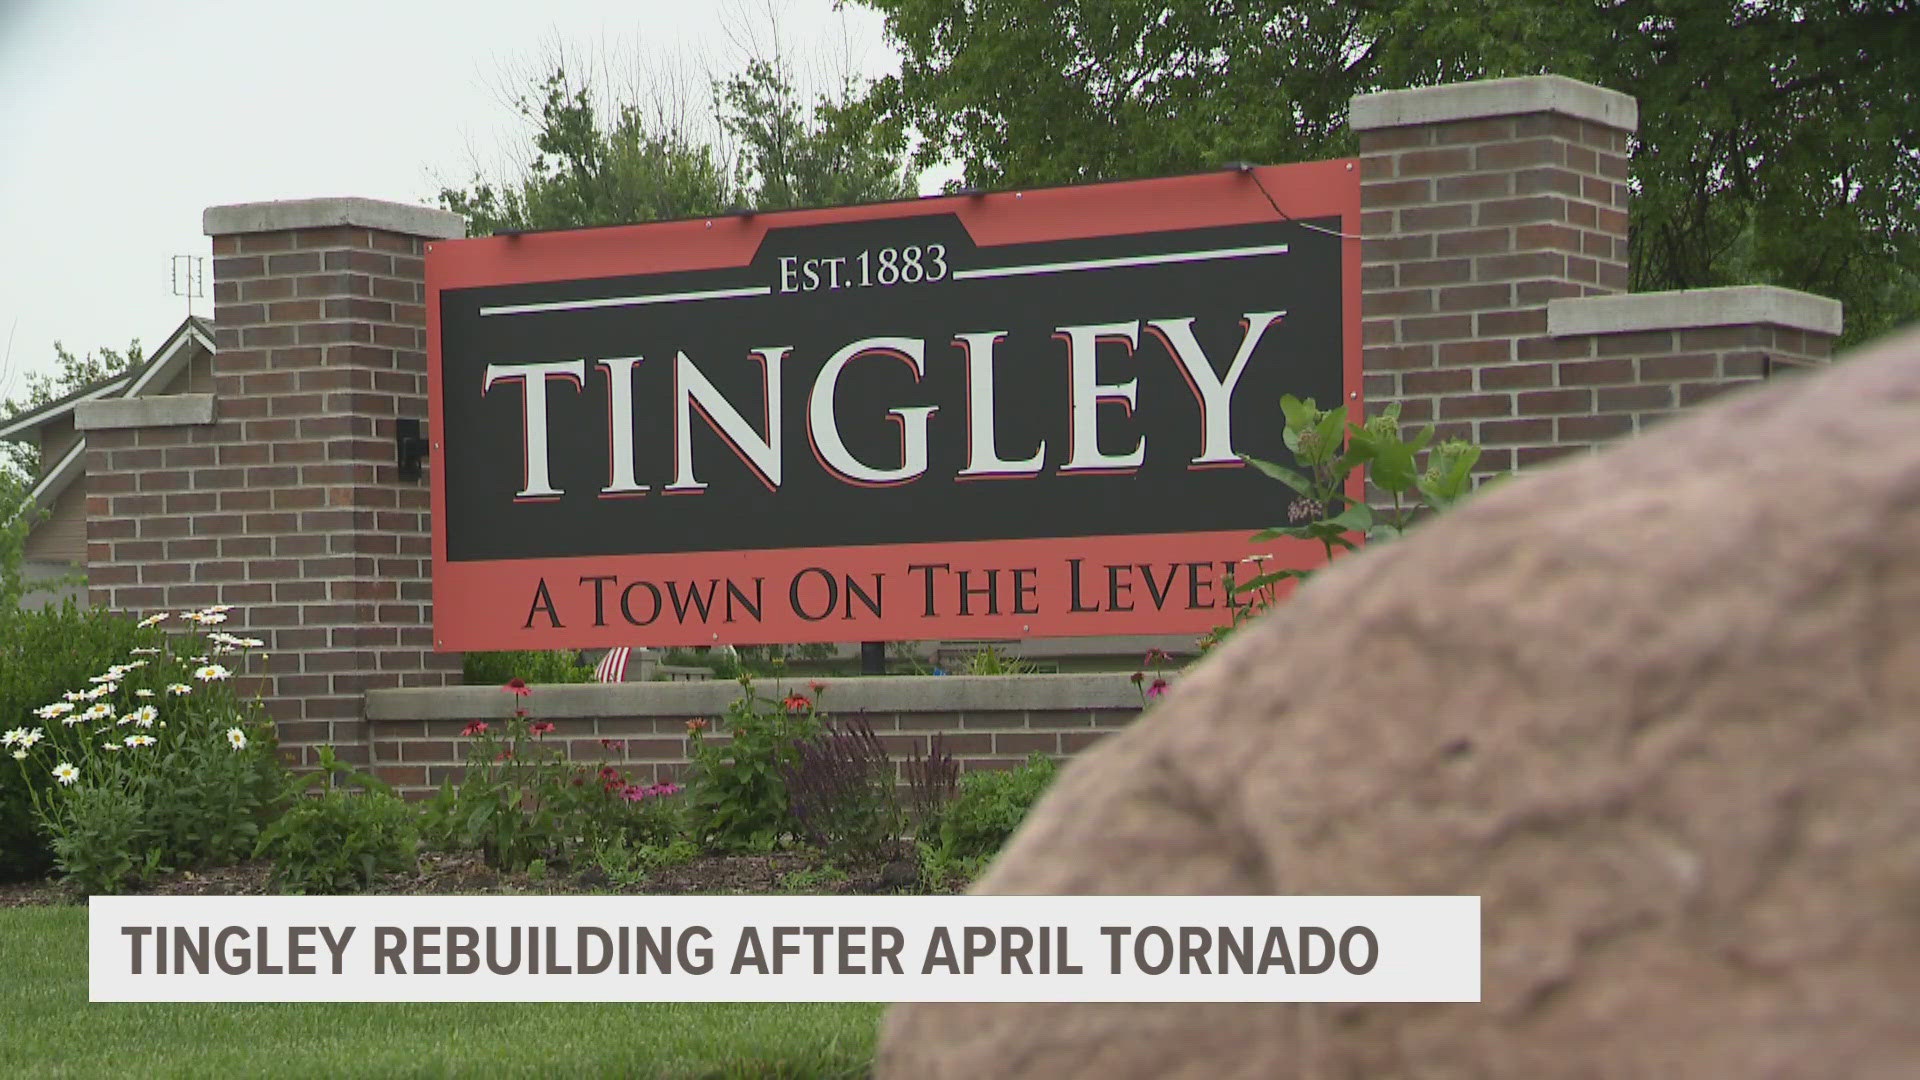 Lifelong Tingley residents said they had never seen a tornado come through their community until the one in April.